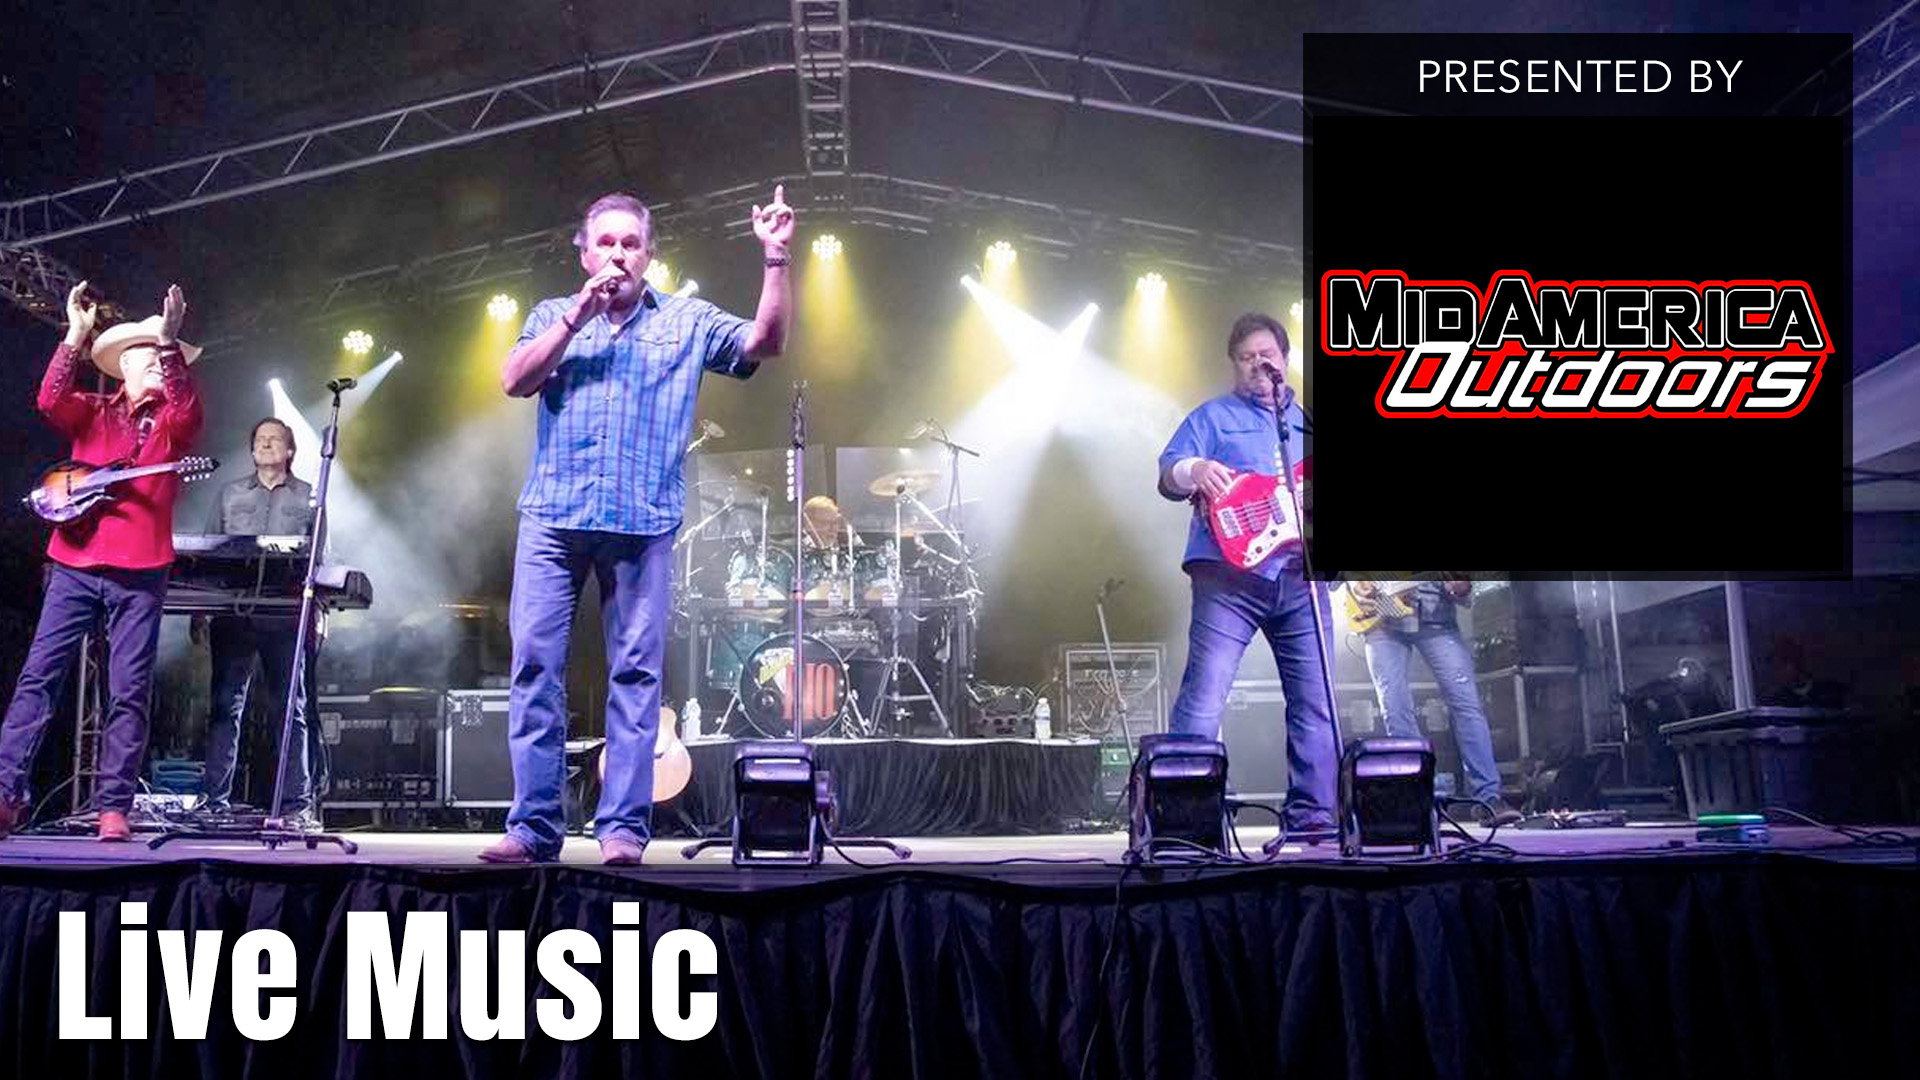 Live Music presented by MidAmerica Outdoors